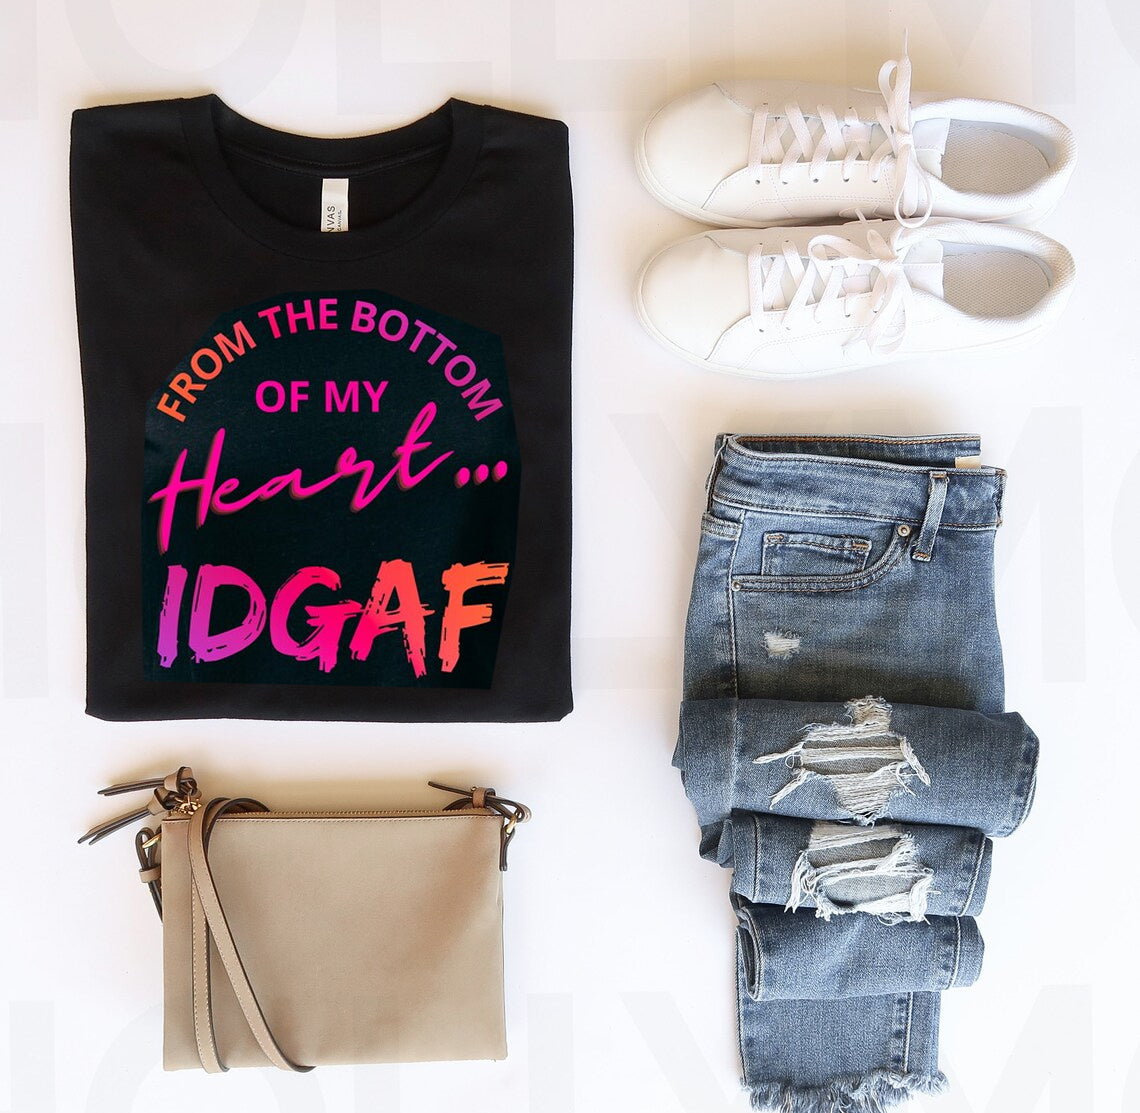 From the Bottom of My Heart IDGAF Graphic Tee